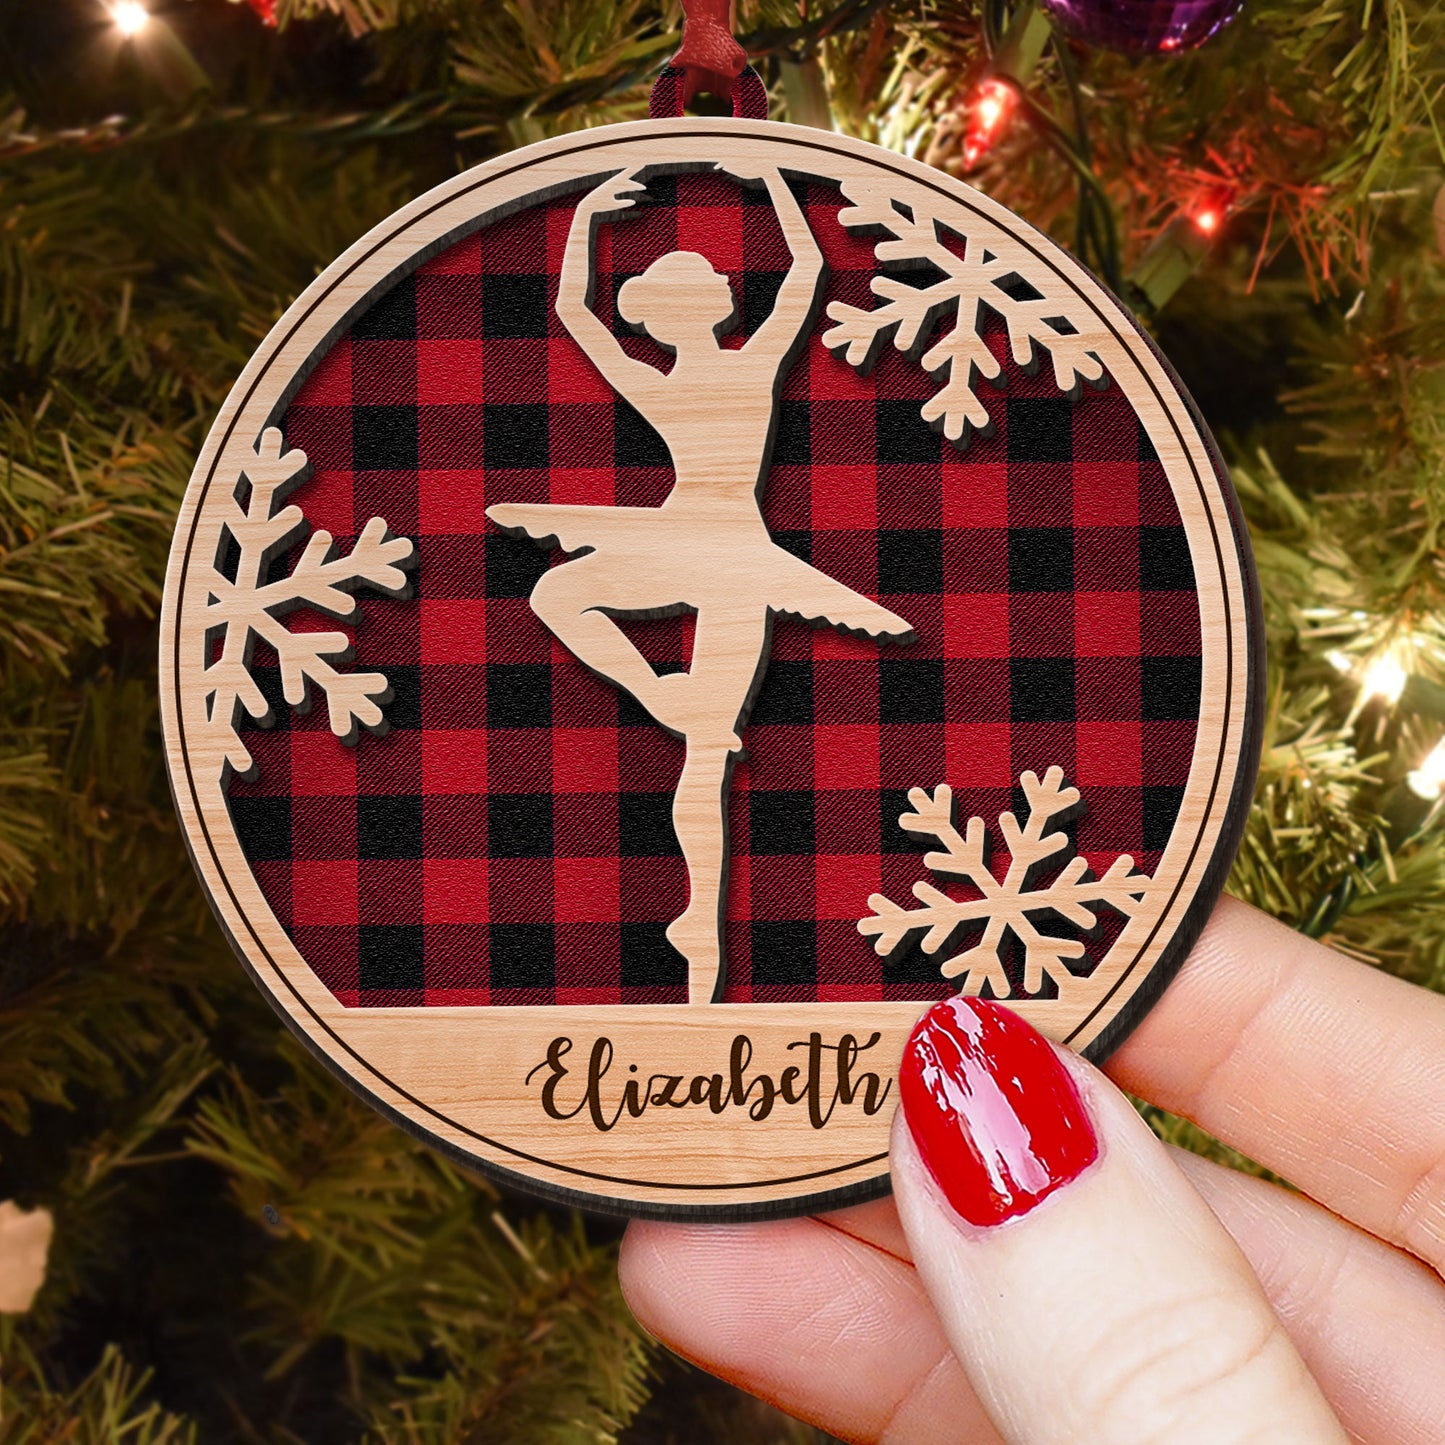 [Only available in the U.S] Ballet Silhouette - Personalized 2 Layered Wooden Ornament - Christmas Gift For Ballet Lovers